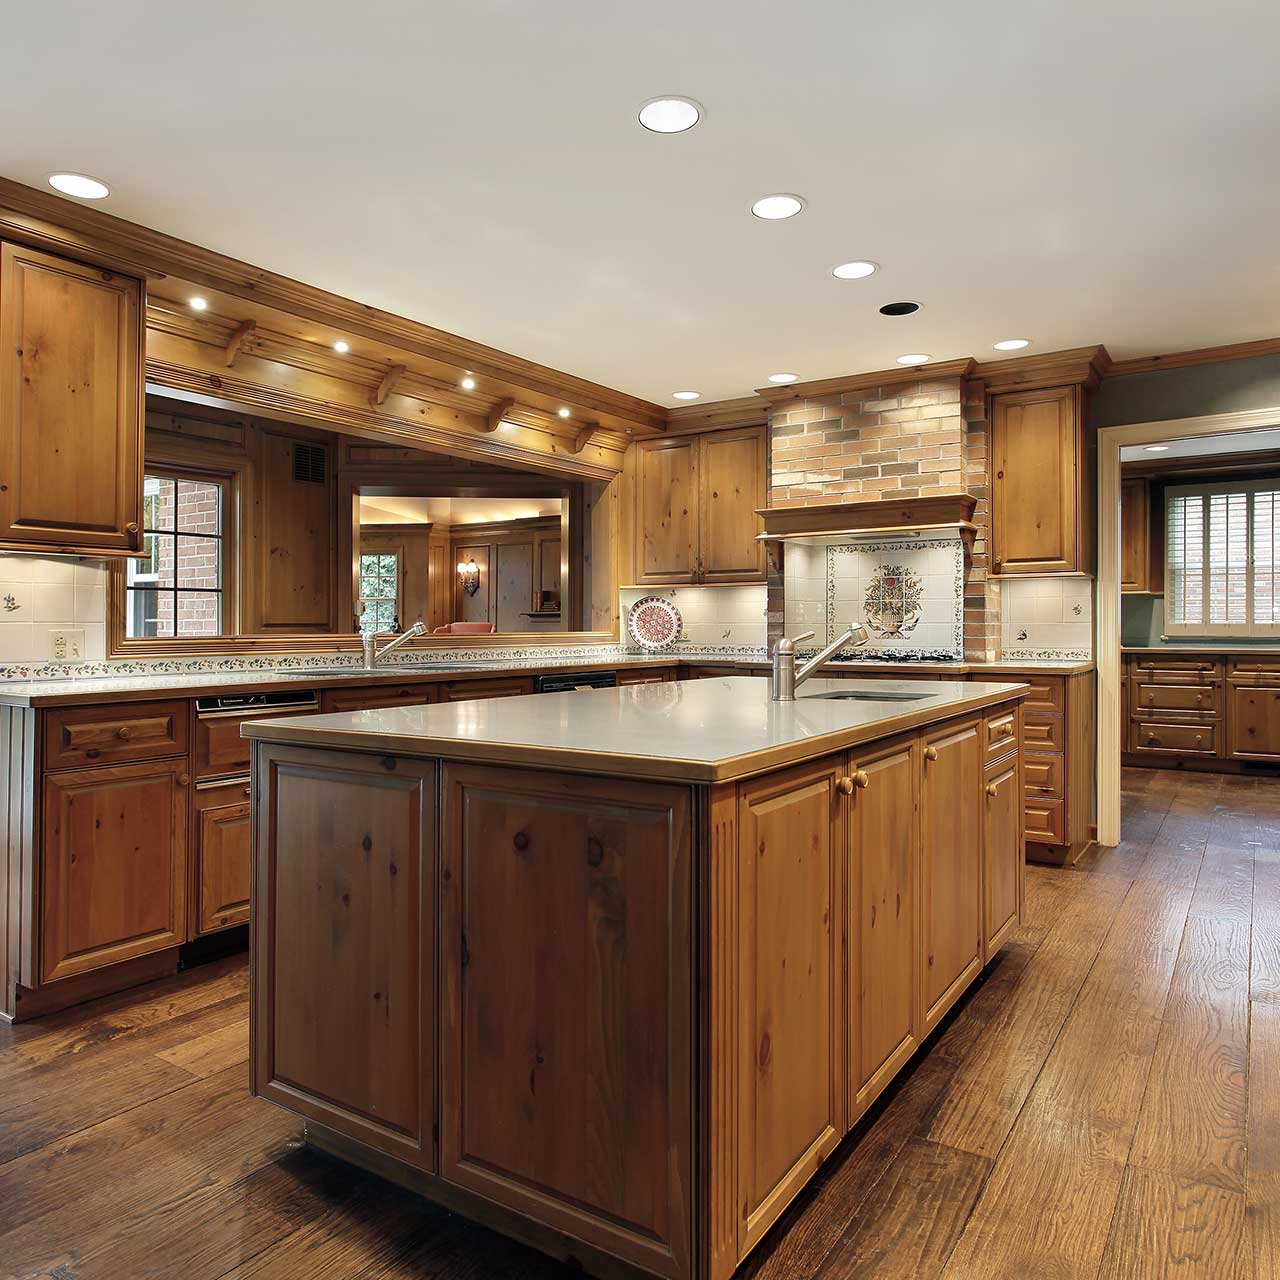 Traditional modular kitchen design gives royal look and feel